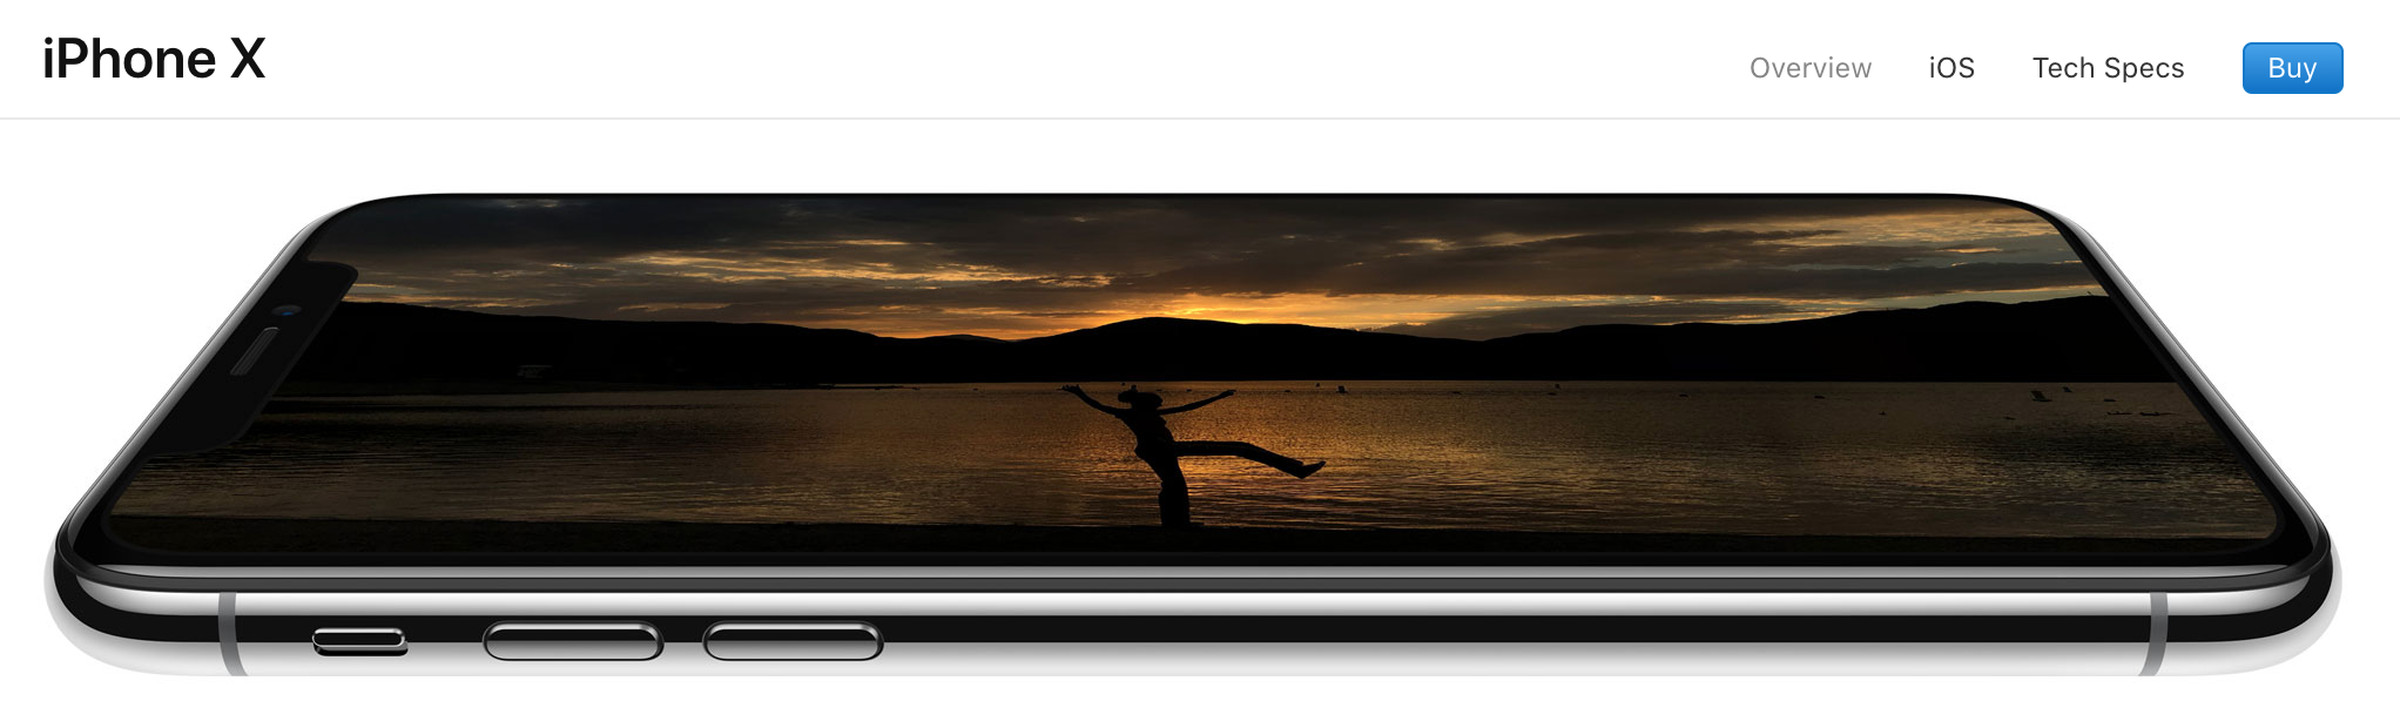 A similar image for the current iPhone X on Apple’s website lends credence to the leaked marketing asset.